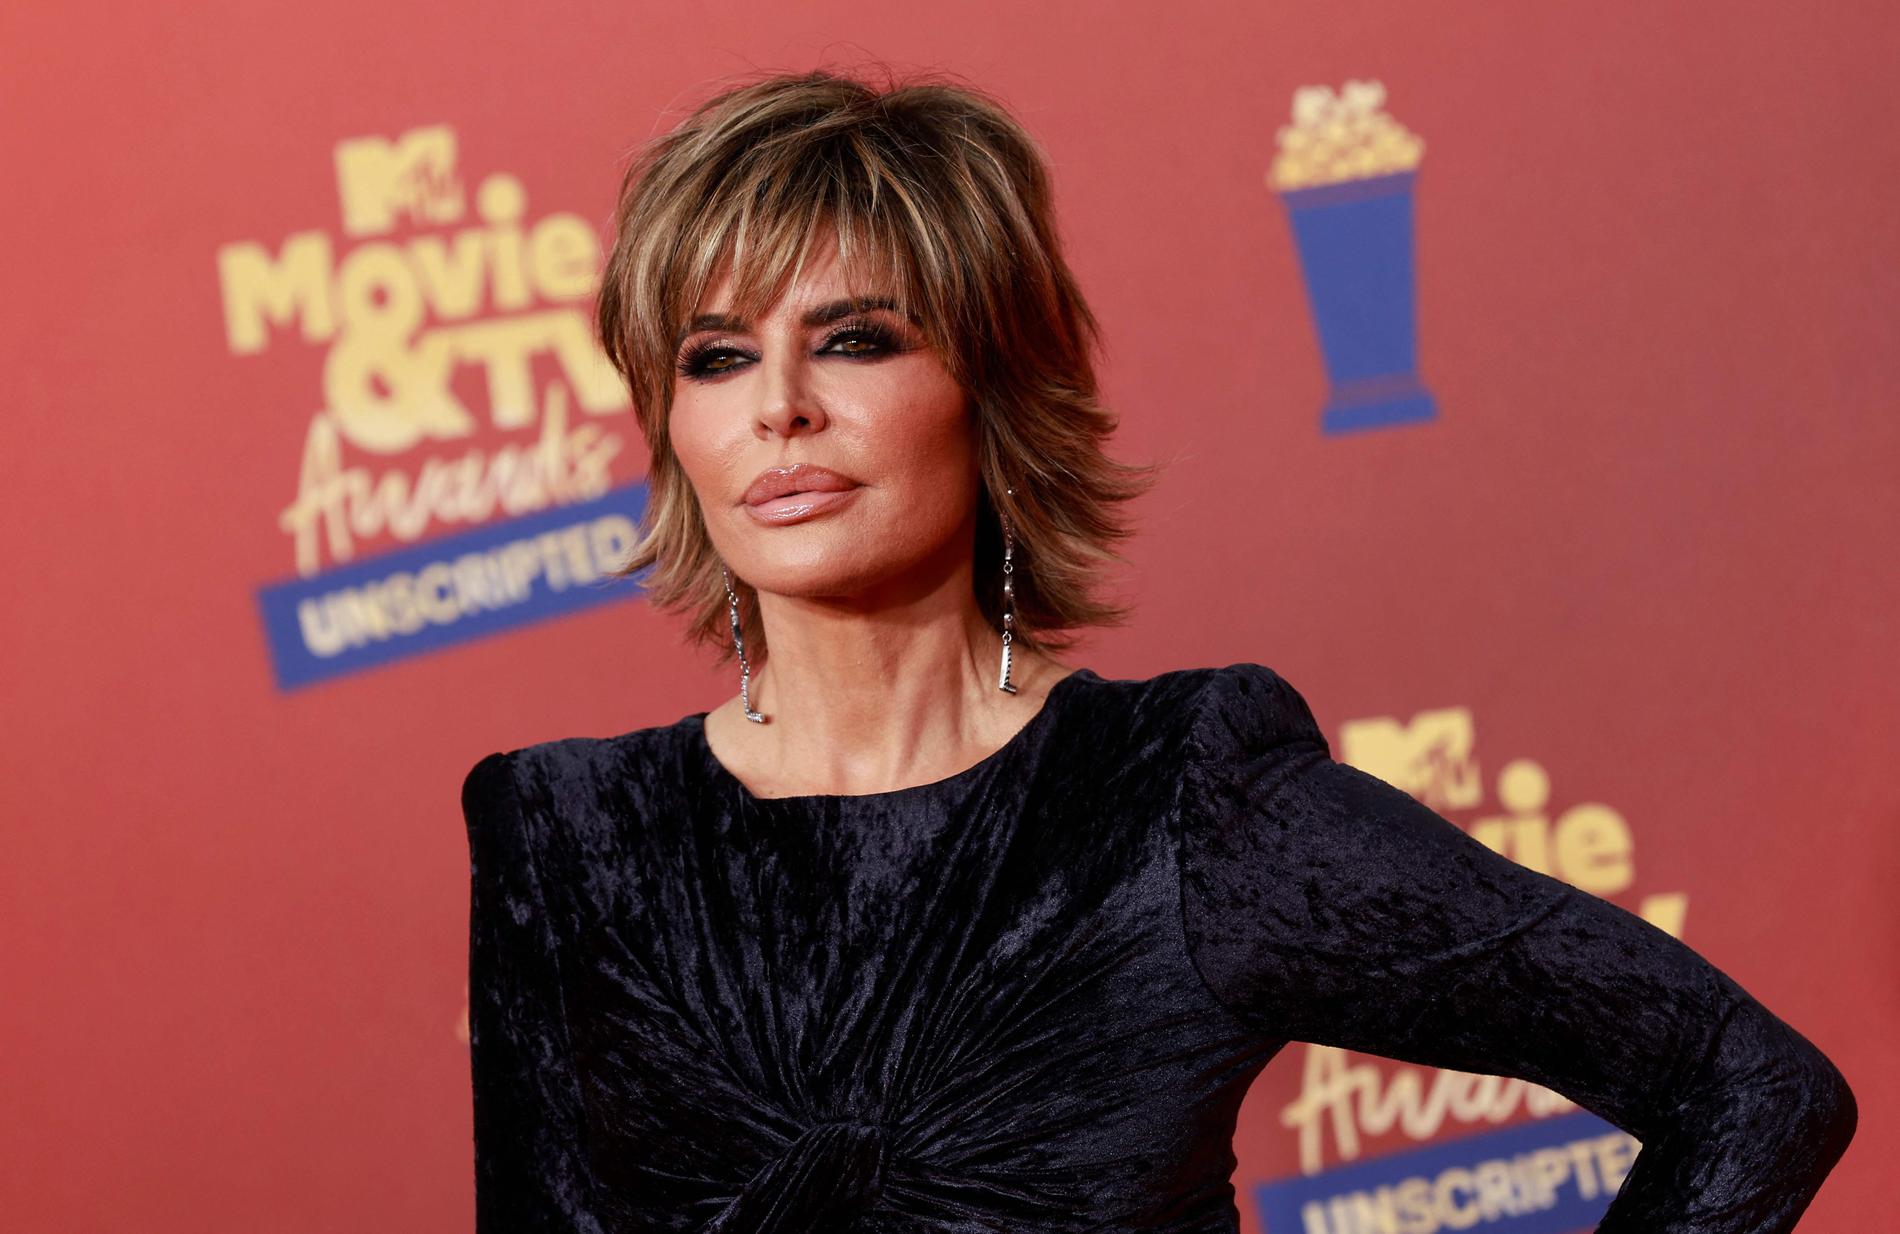 Lisa Rinna quits ‘The Real Housewives of Beverly Hills’